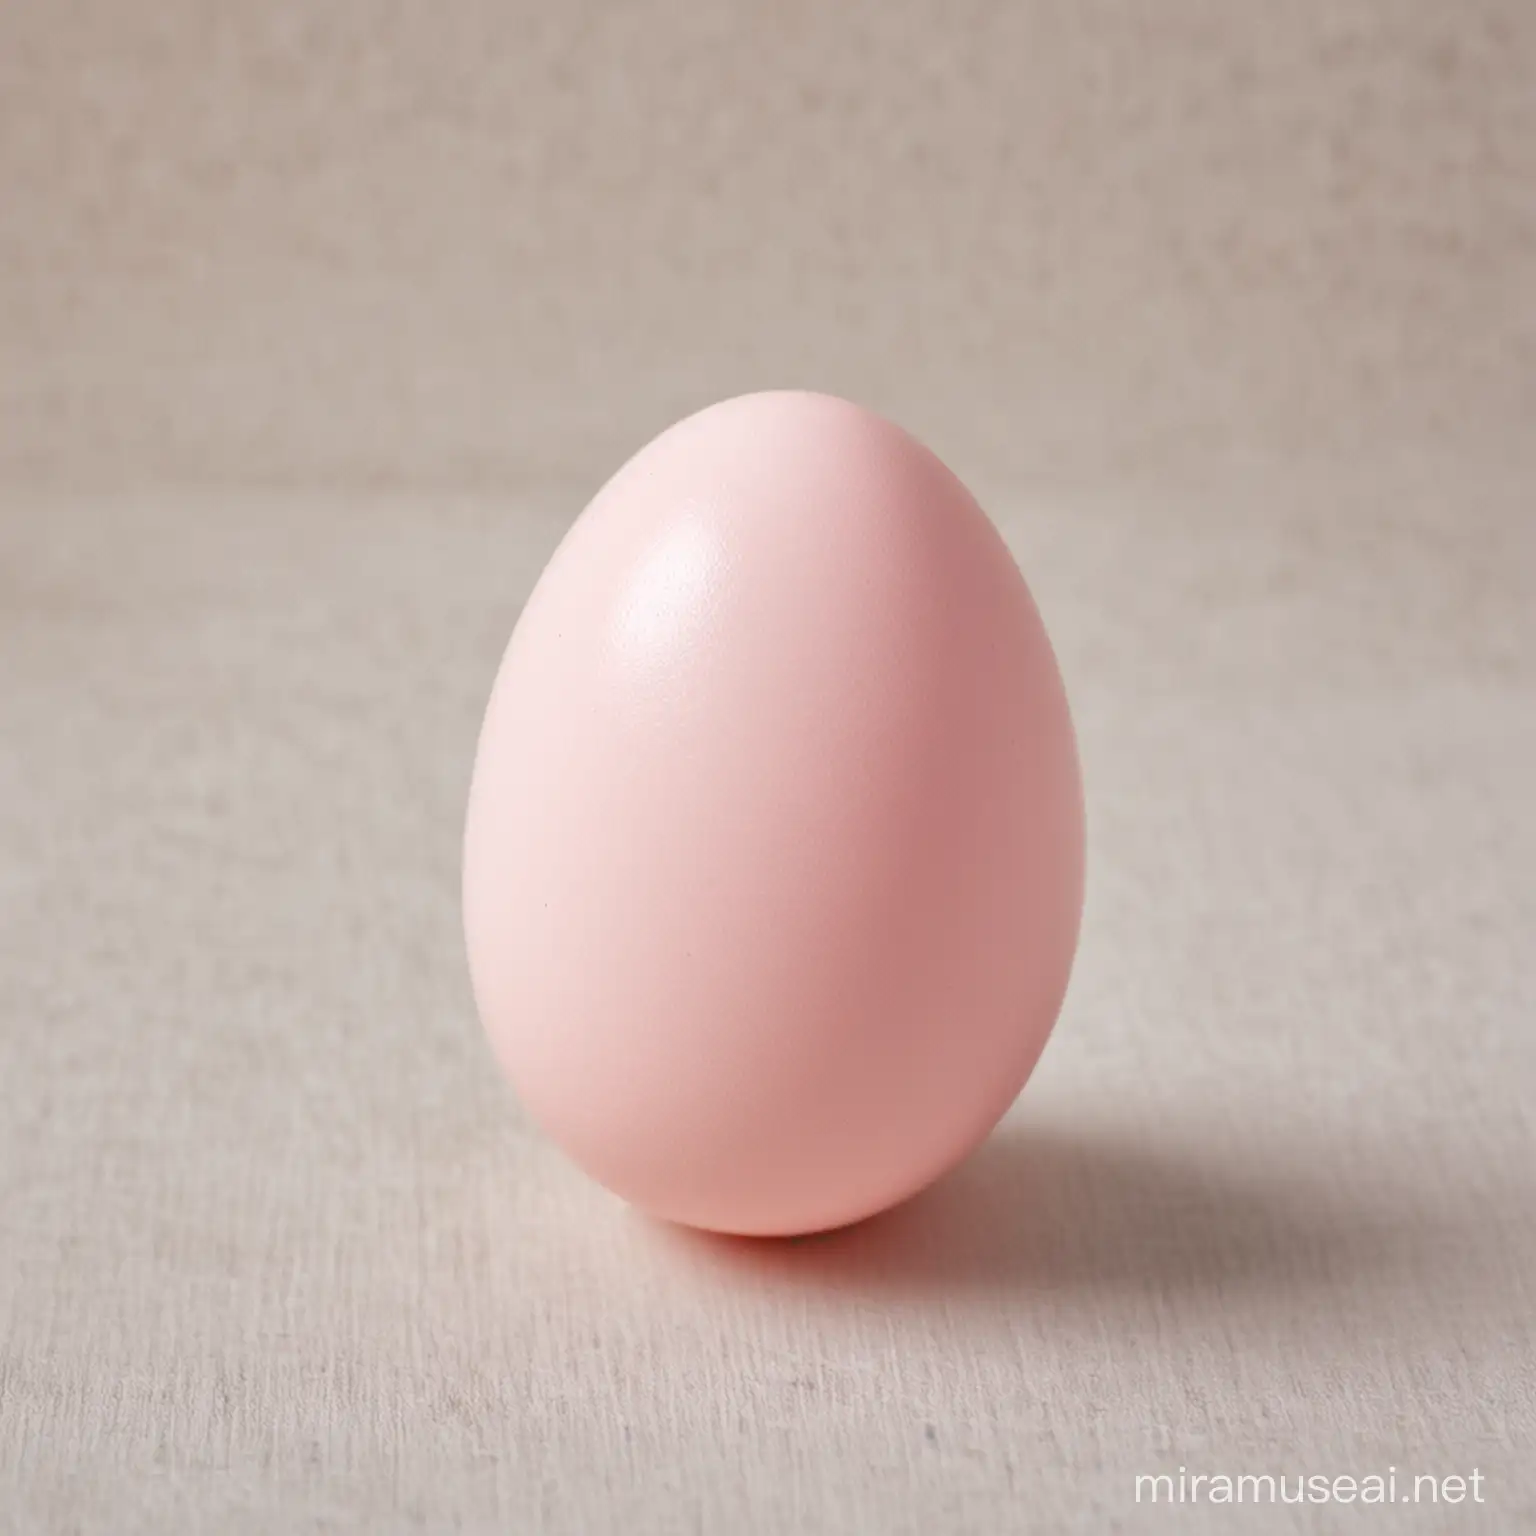 Delightful Pink Easter Egg with Spring Blossoms